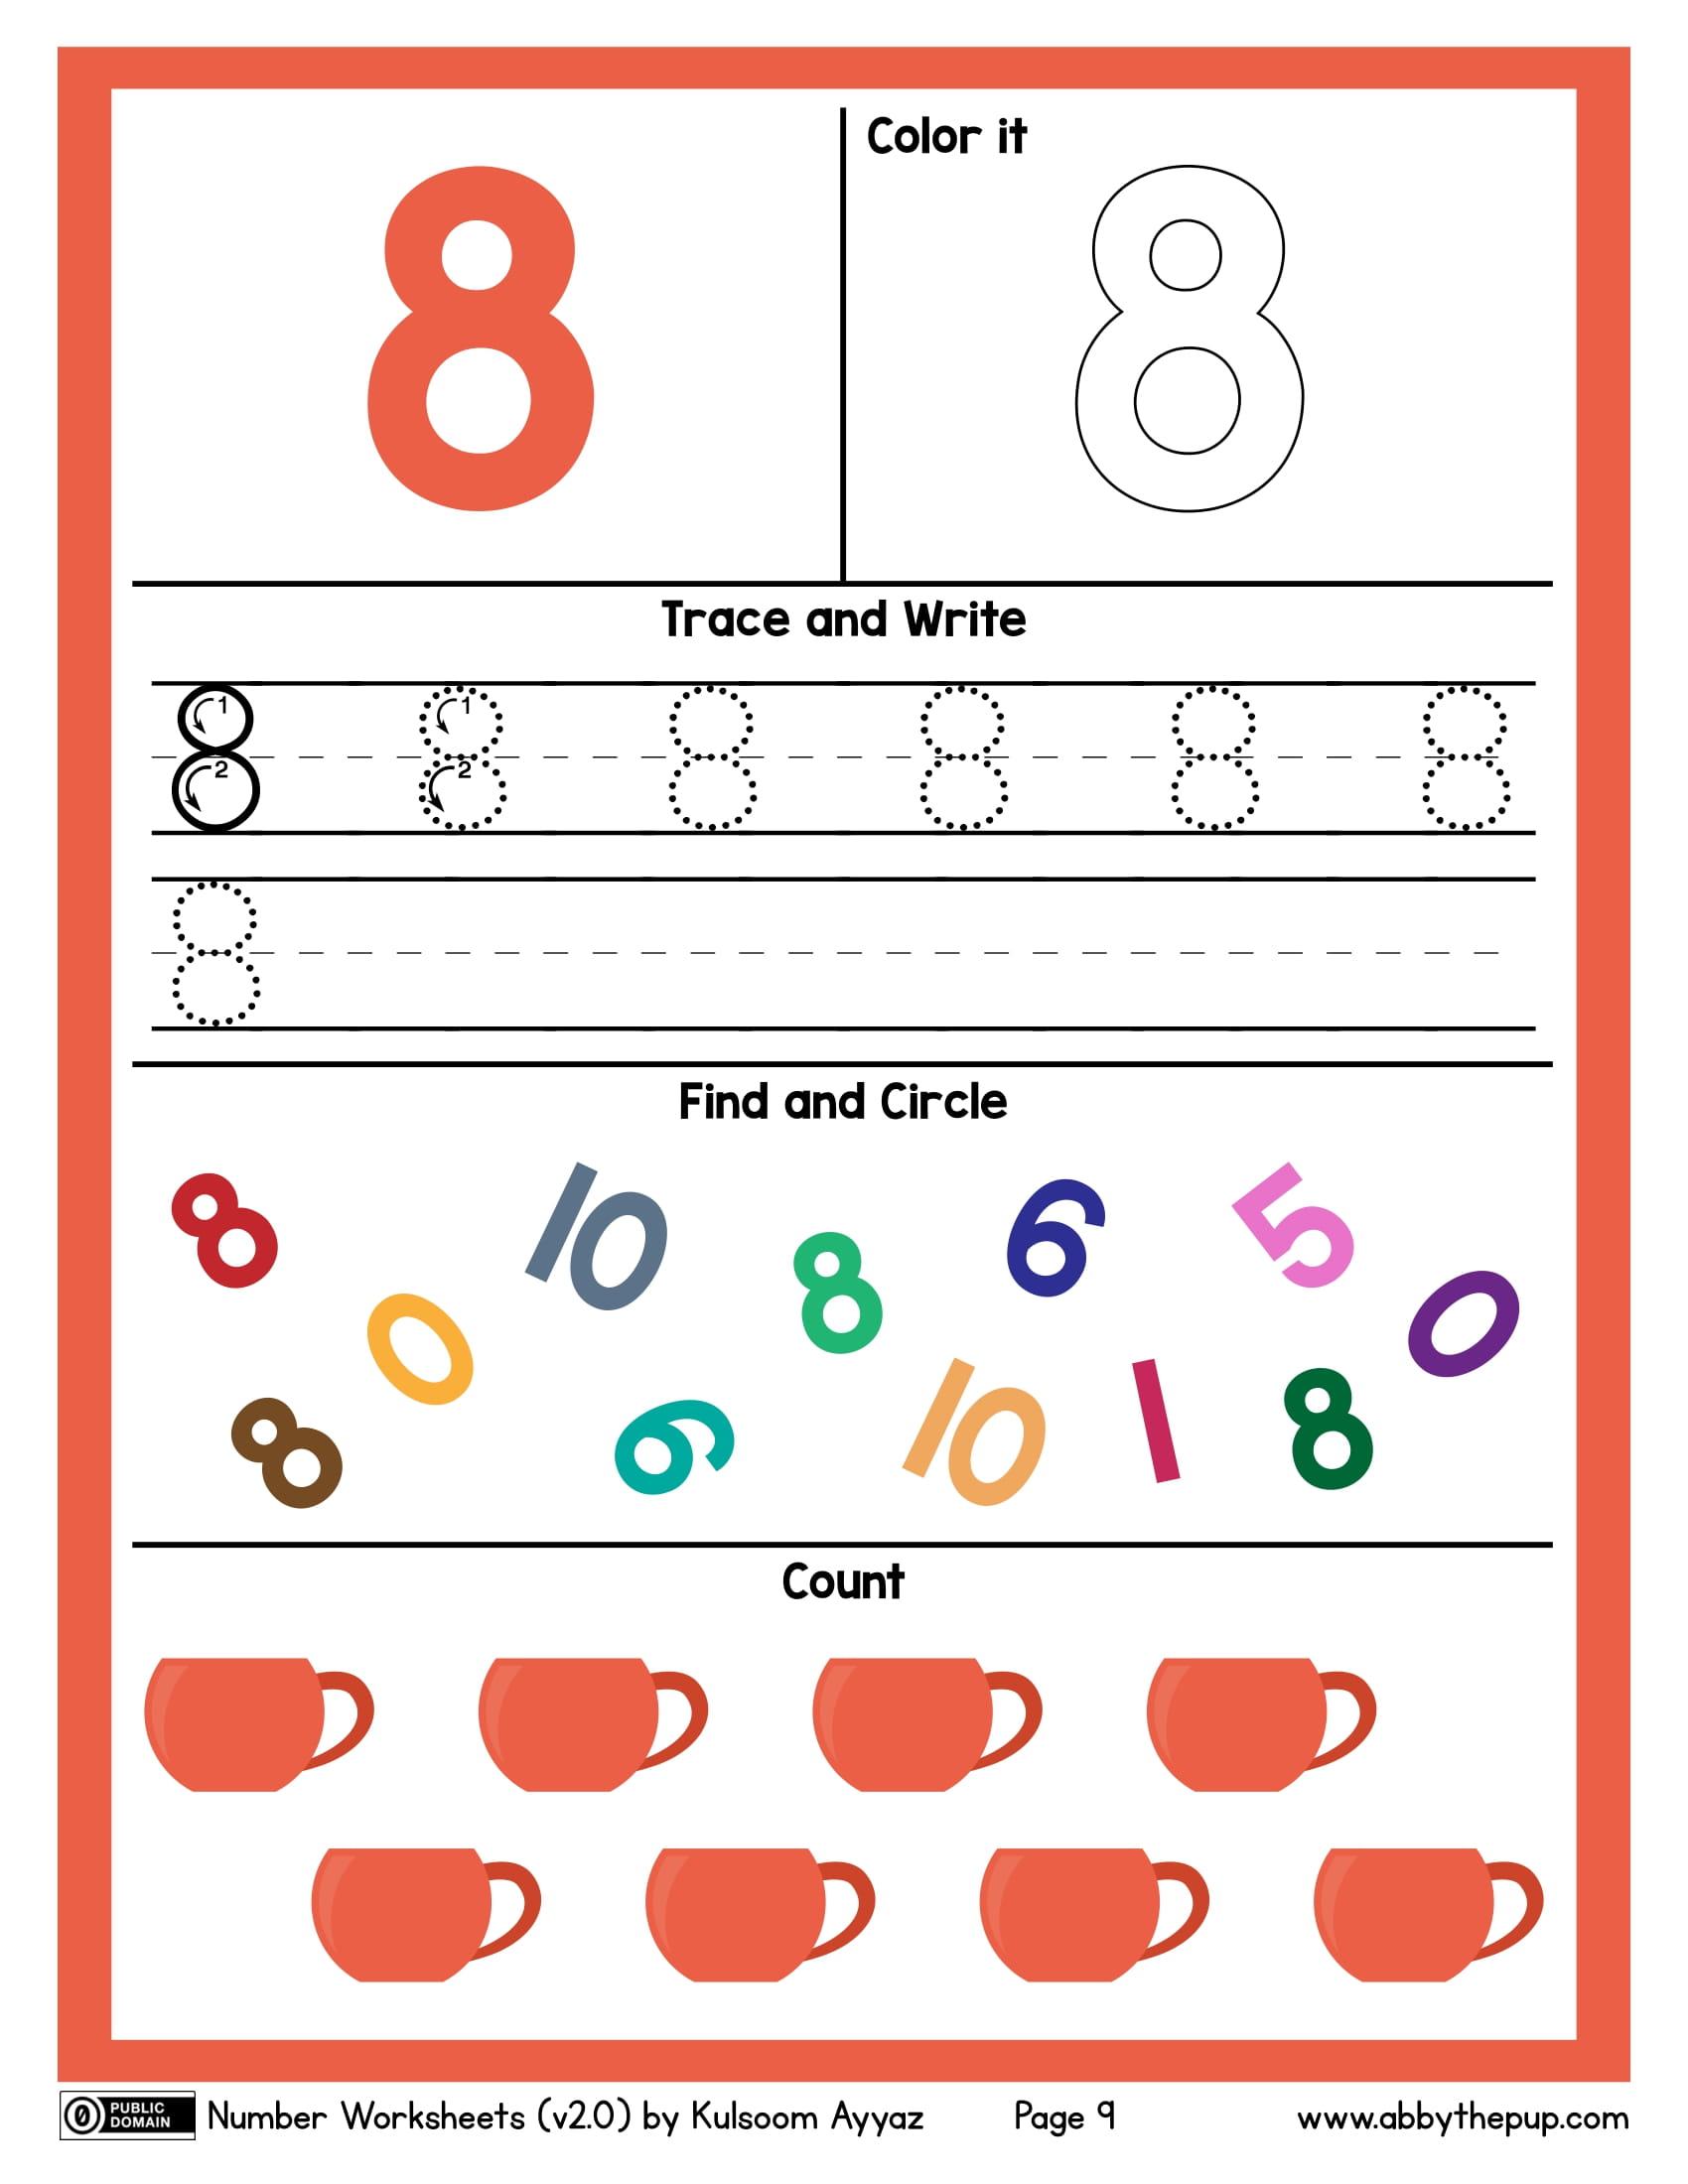 Number color trace write find and count worksheet free printable puzzle games